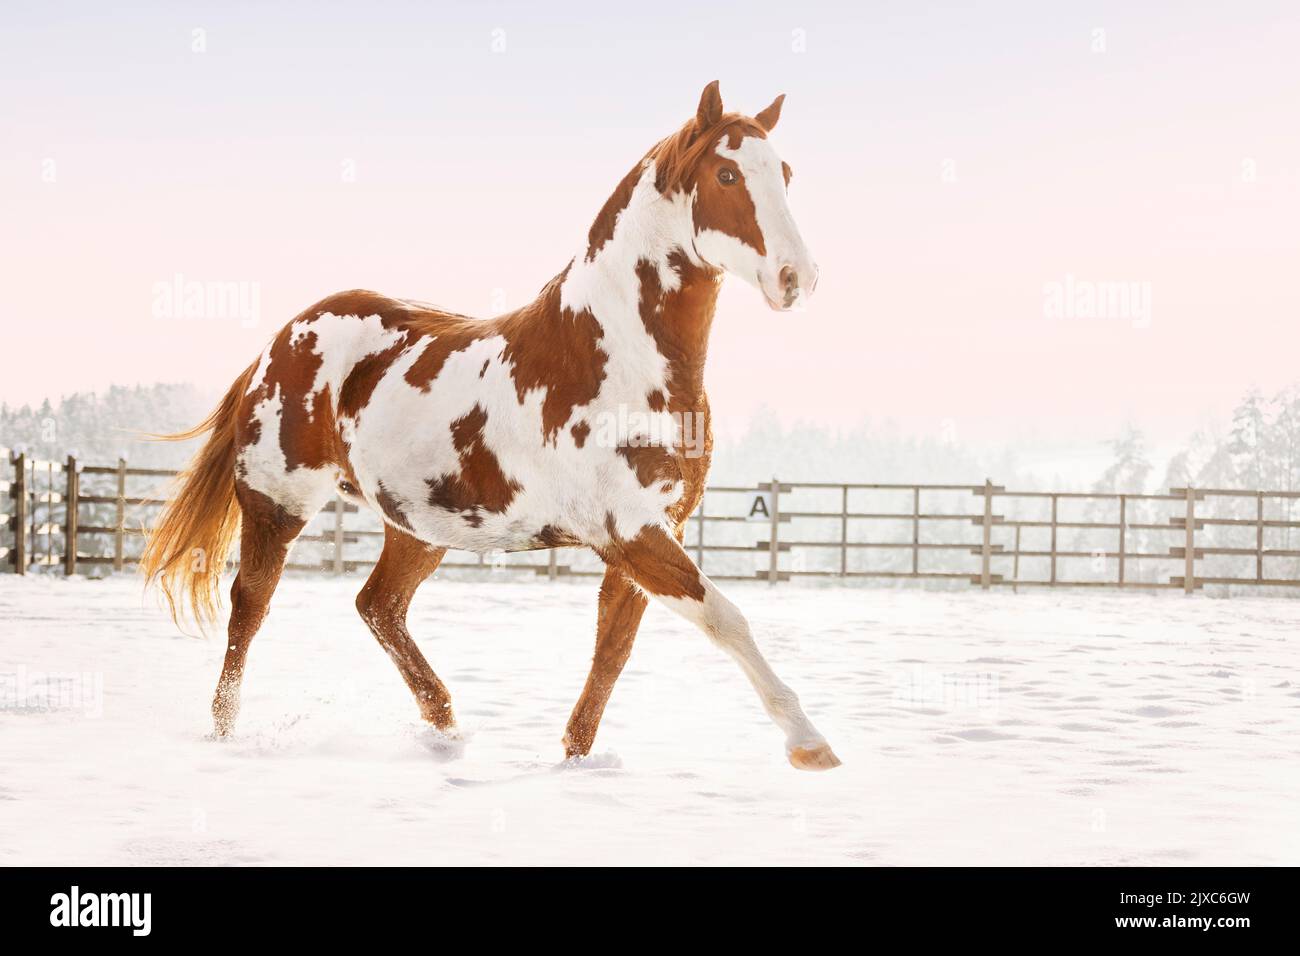 American Paint Horse. Mare (Overo) trotting on a snowy pasture Germany. Stock Photo